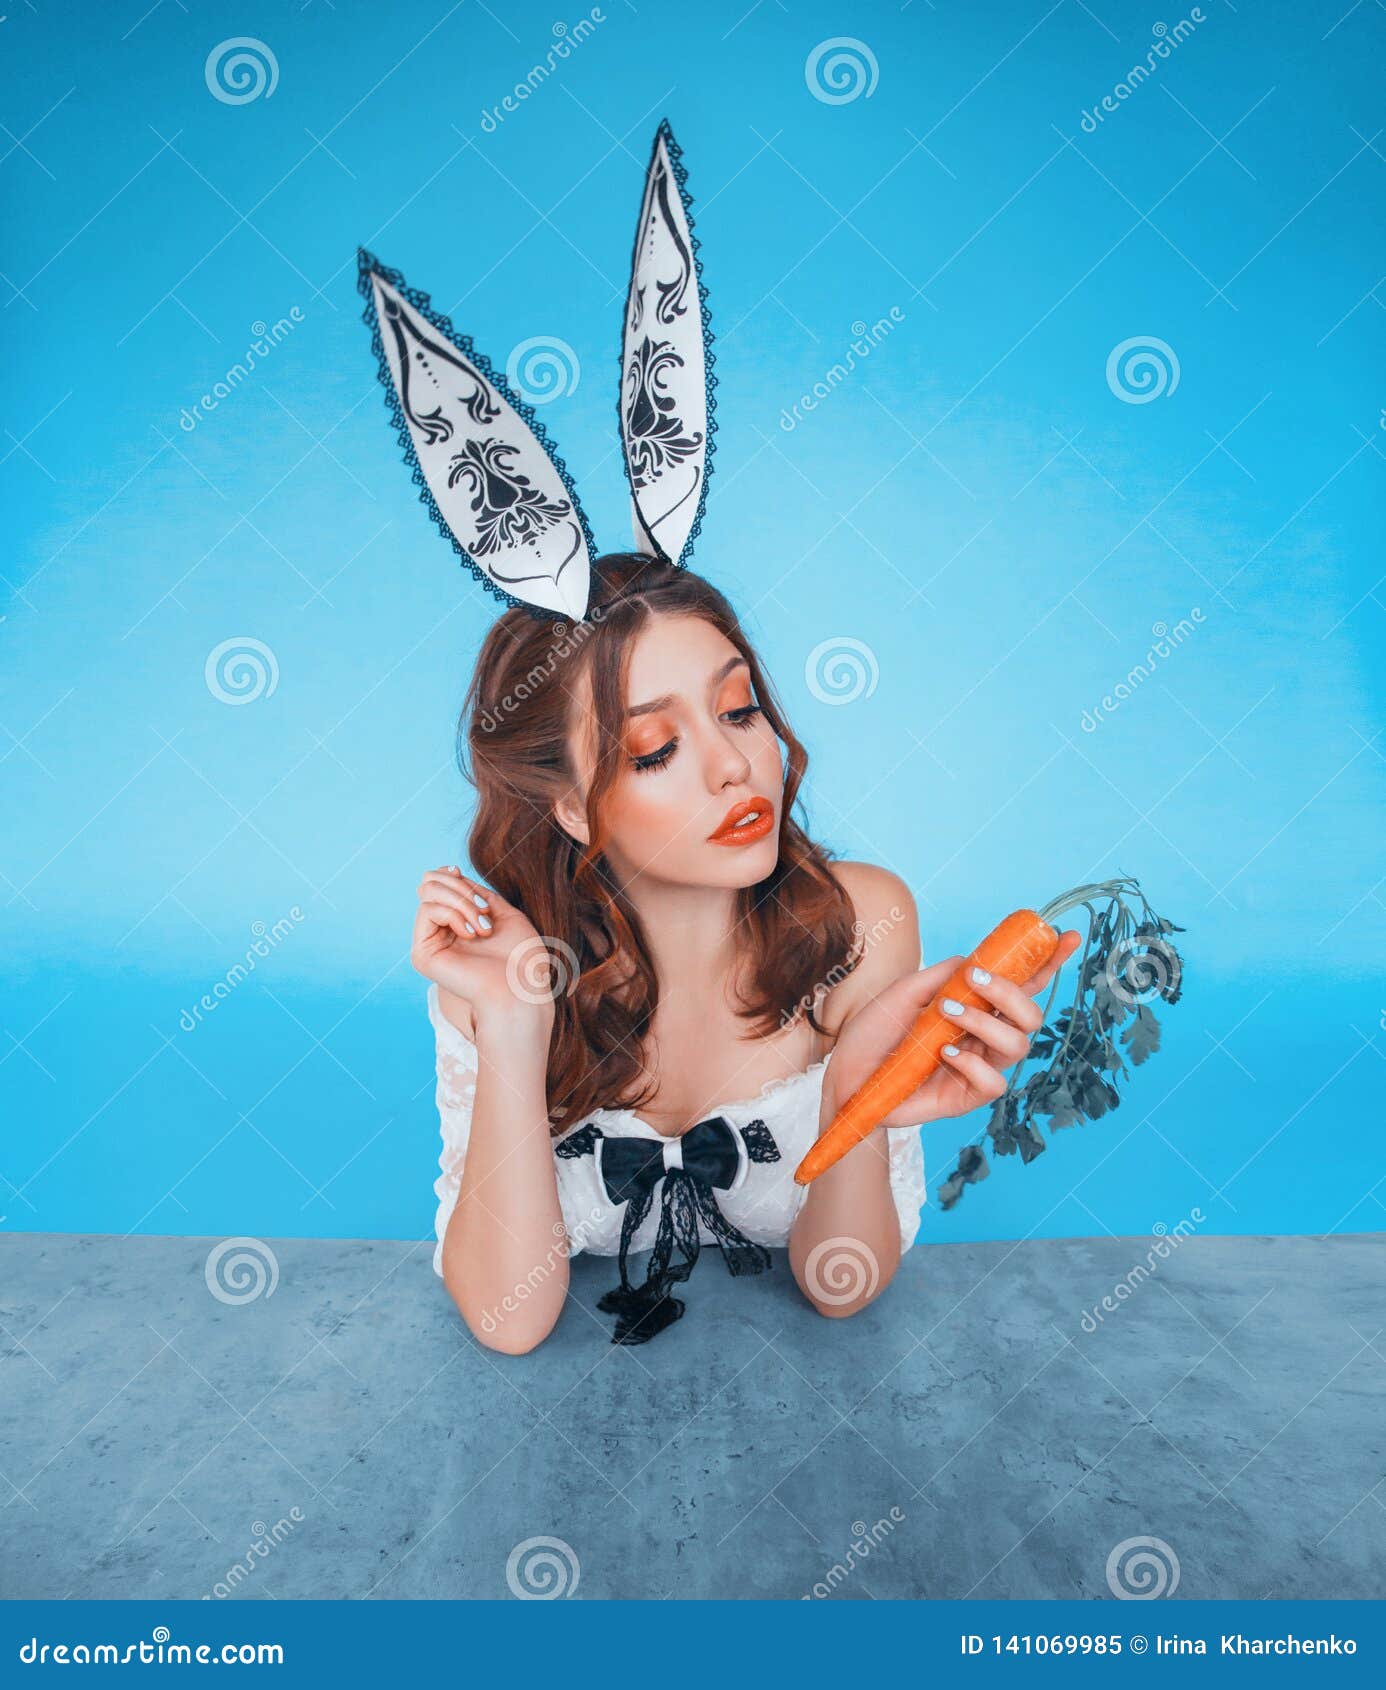 Nudes girls in sexy easter bunny costumes